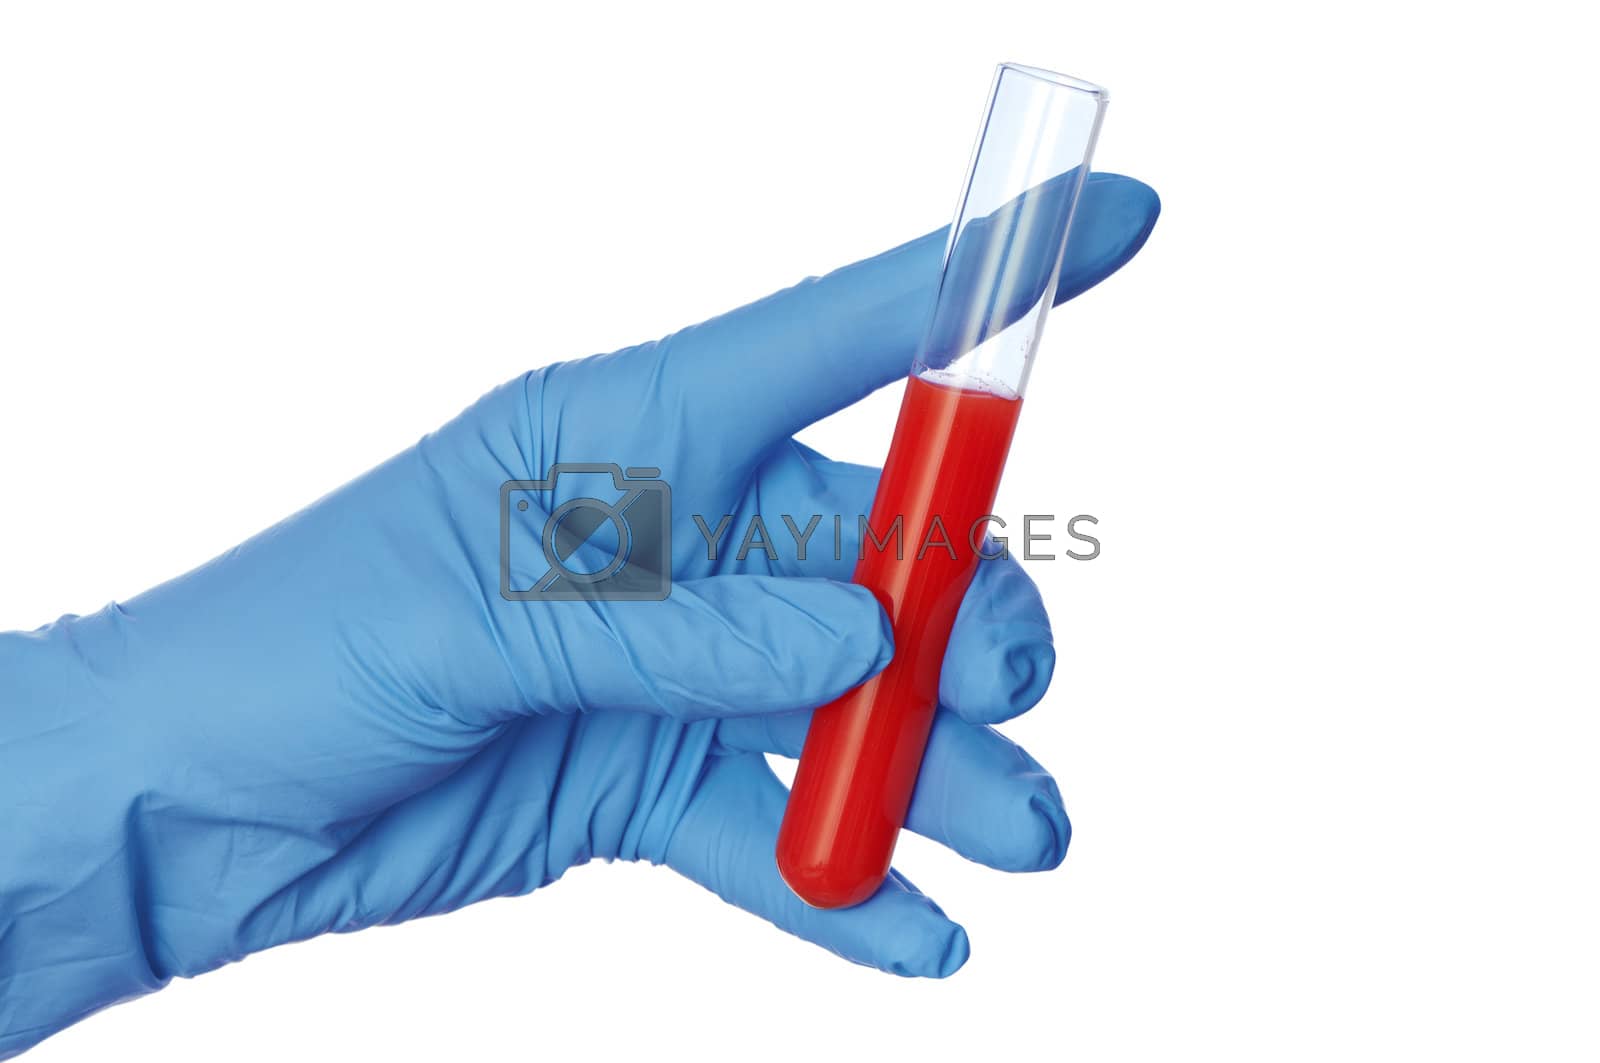 Royalty free image of sample of bloods by merzavka